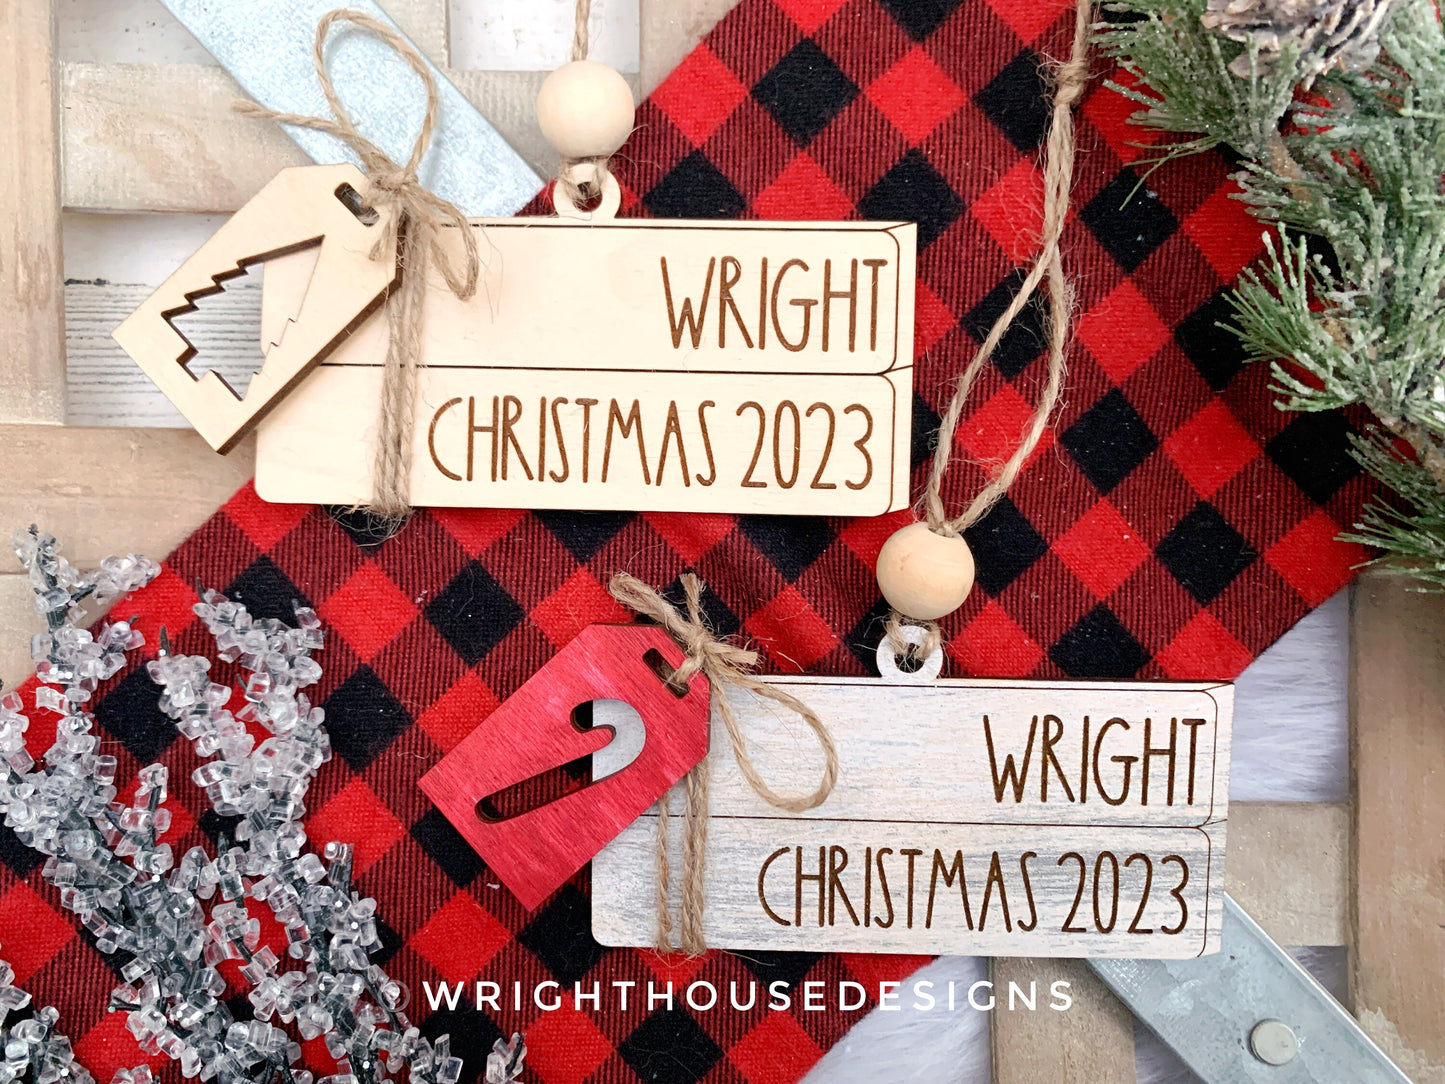 Christmas 2023 Bookstack Ornaments - Personalized Family Name Ornament and Stocking Tags - Holiday Gift For Couples - Custom Year Ornament